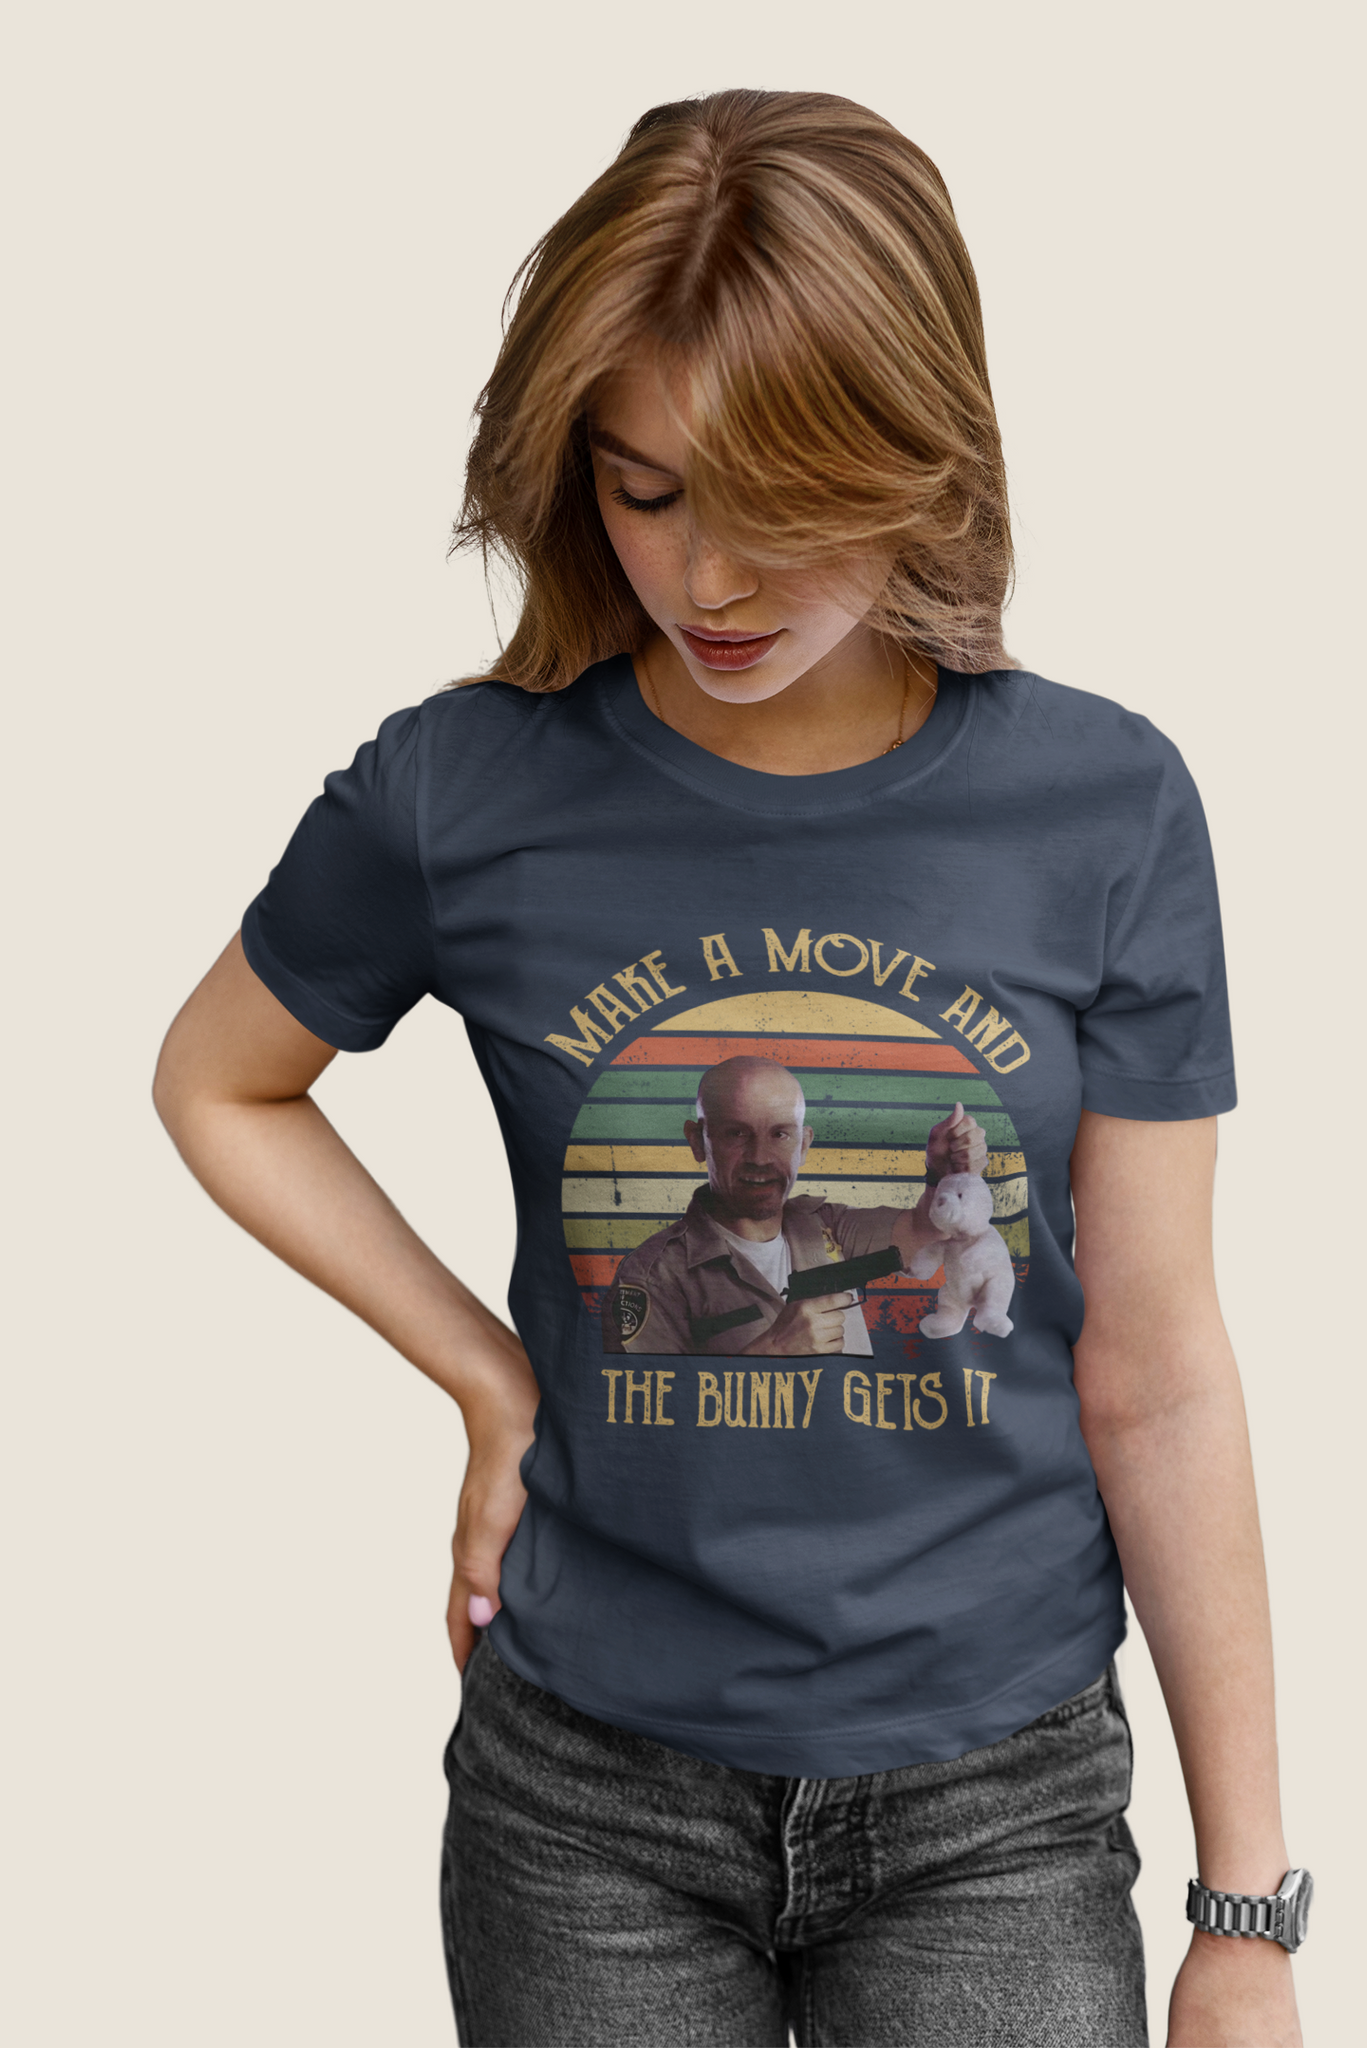 Con Air Vintage T Shirt, Make A Move And The Bunny Gets It Tshirt, Cyrus Grissom T Shirt